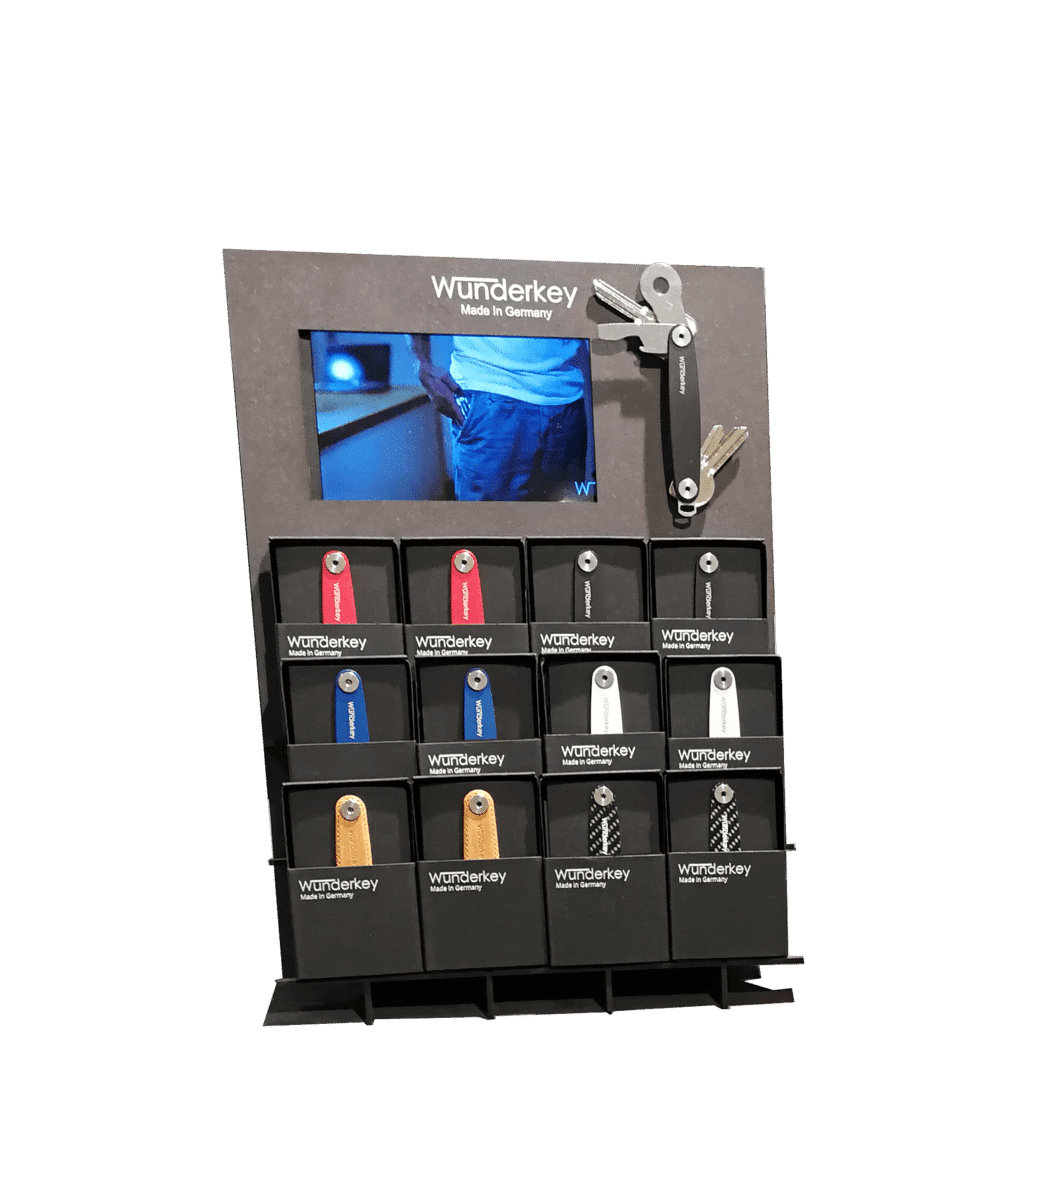 Wunderkey – counter displays and product presentation for a key organizer